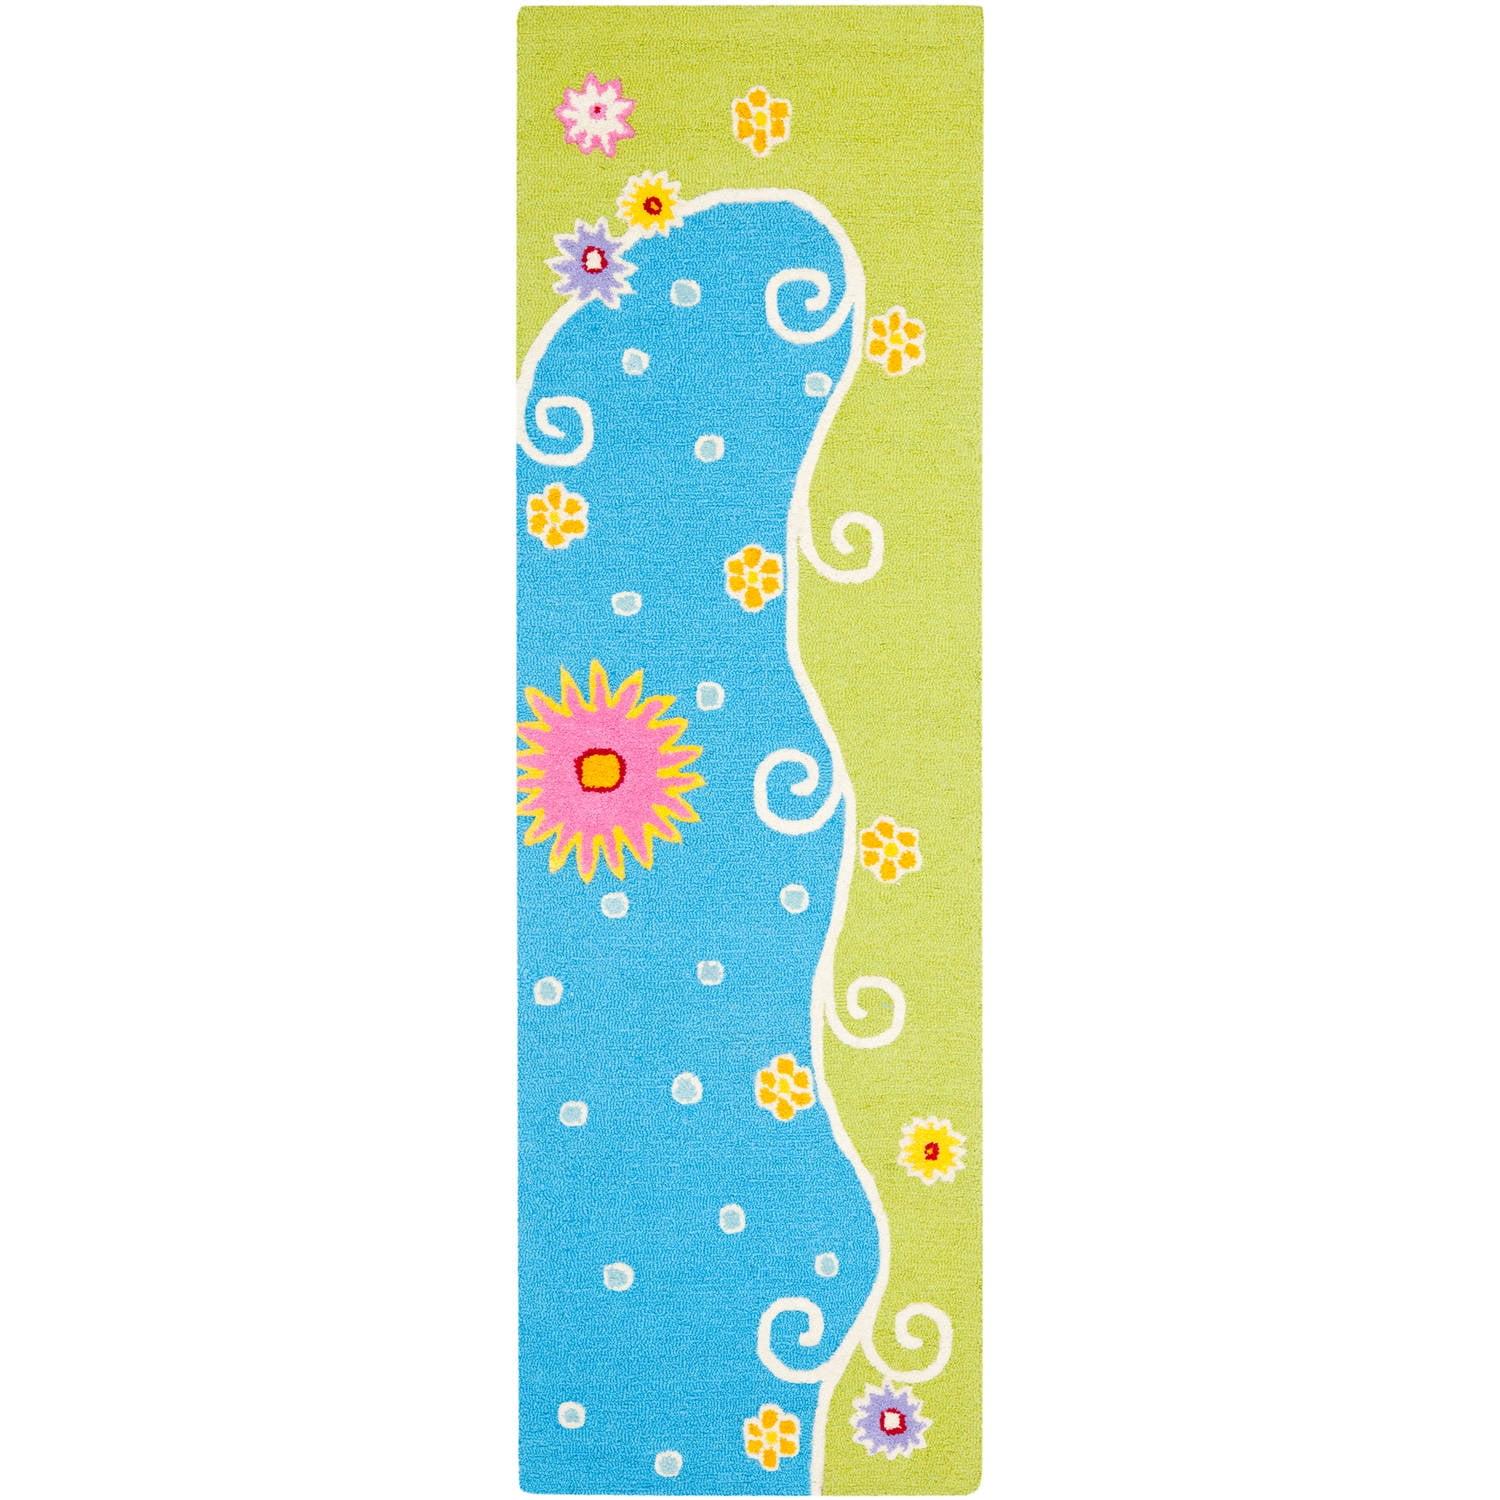 Hand-Tufted Blue Wool Kids Runner Rug with Floral Swirls, 2'3" x 7'